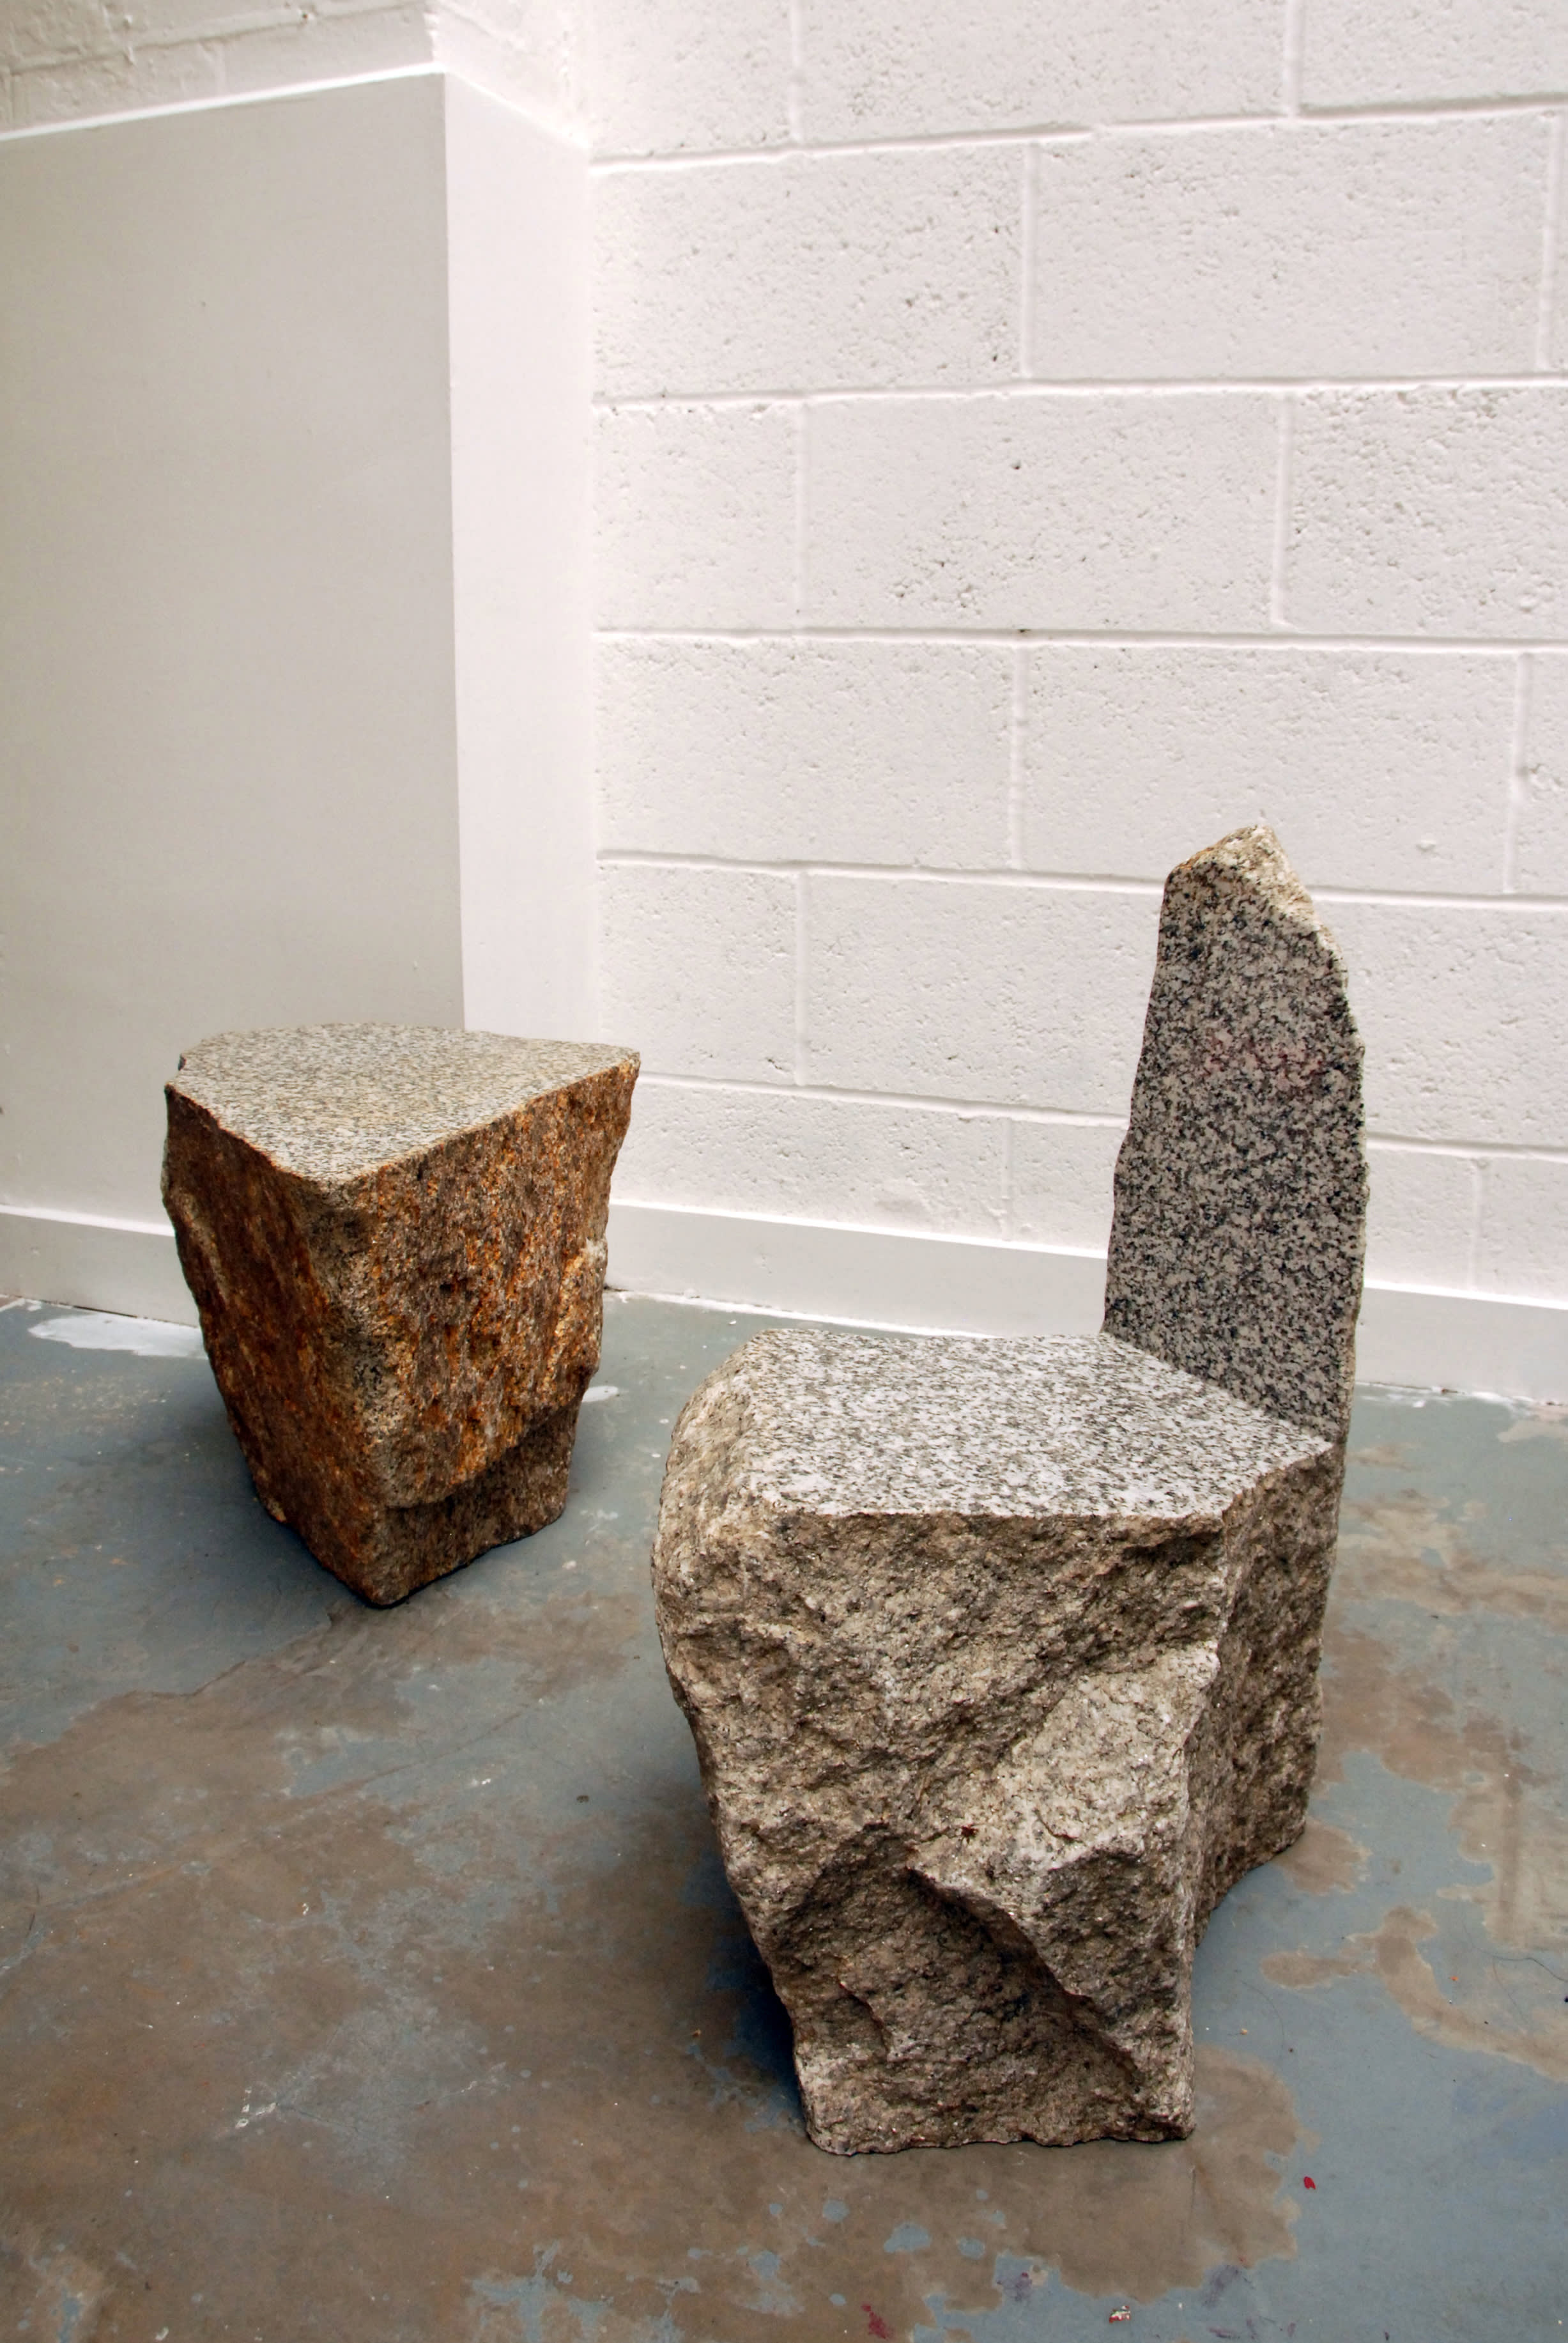 DeLank Cornish Granite used by Lamb in the design of a chair and side table.